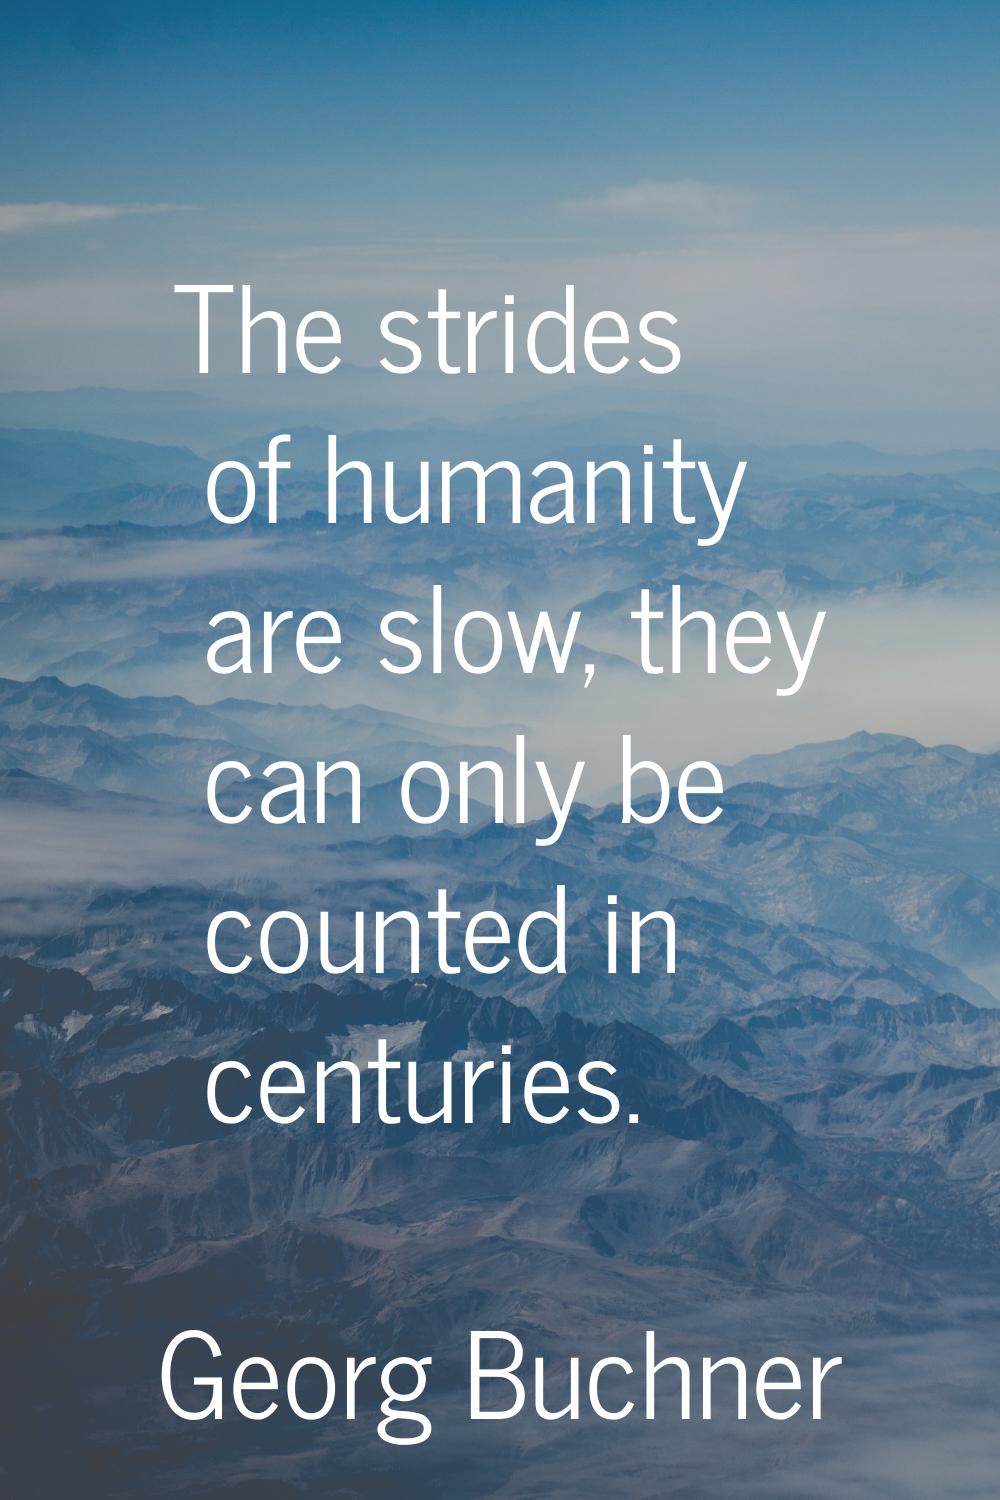 The strides of humanity are slow, they can only be counted in centuries.